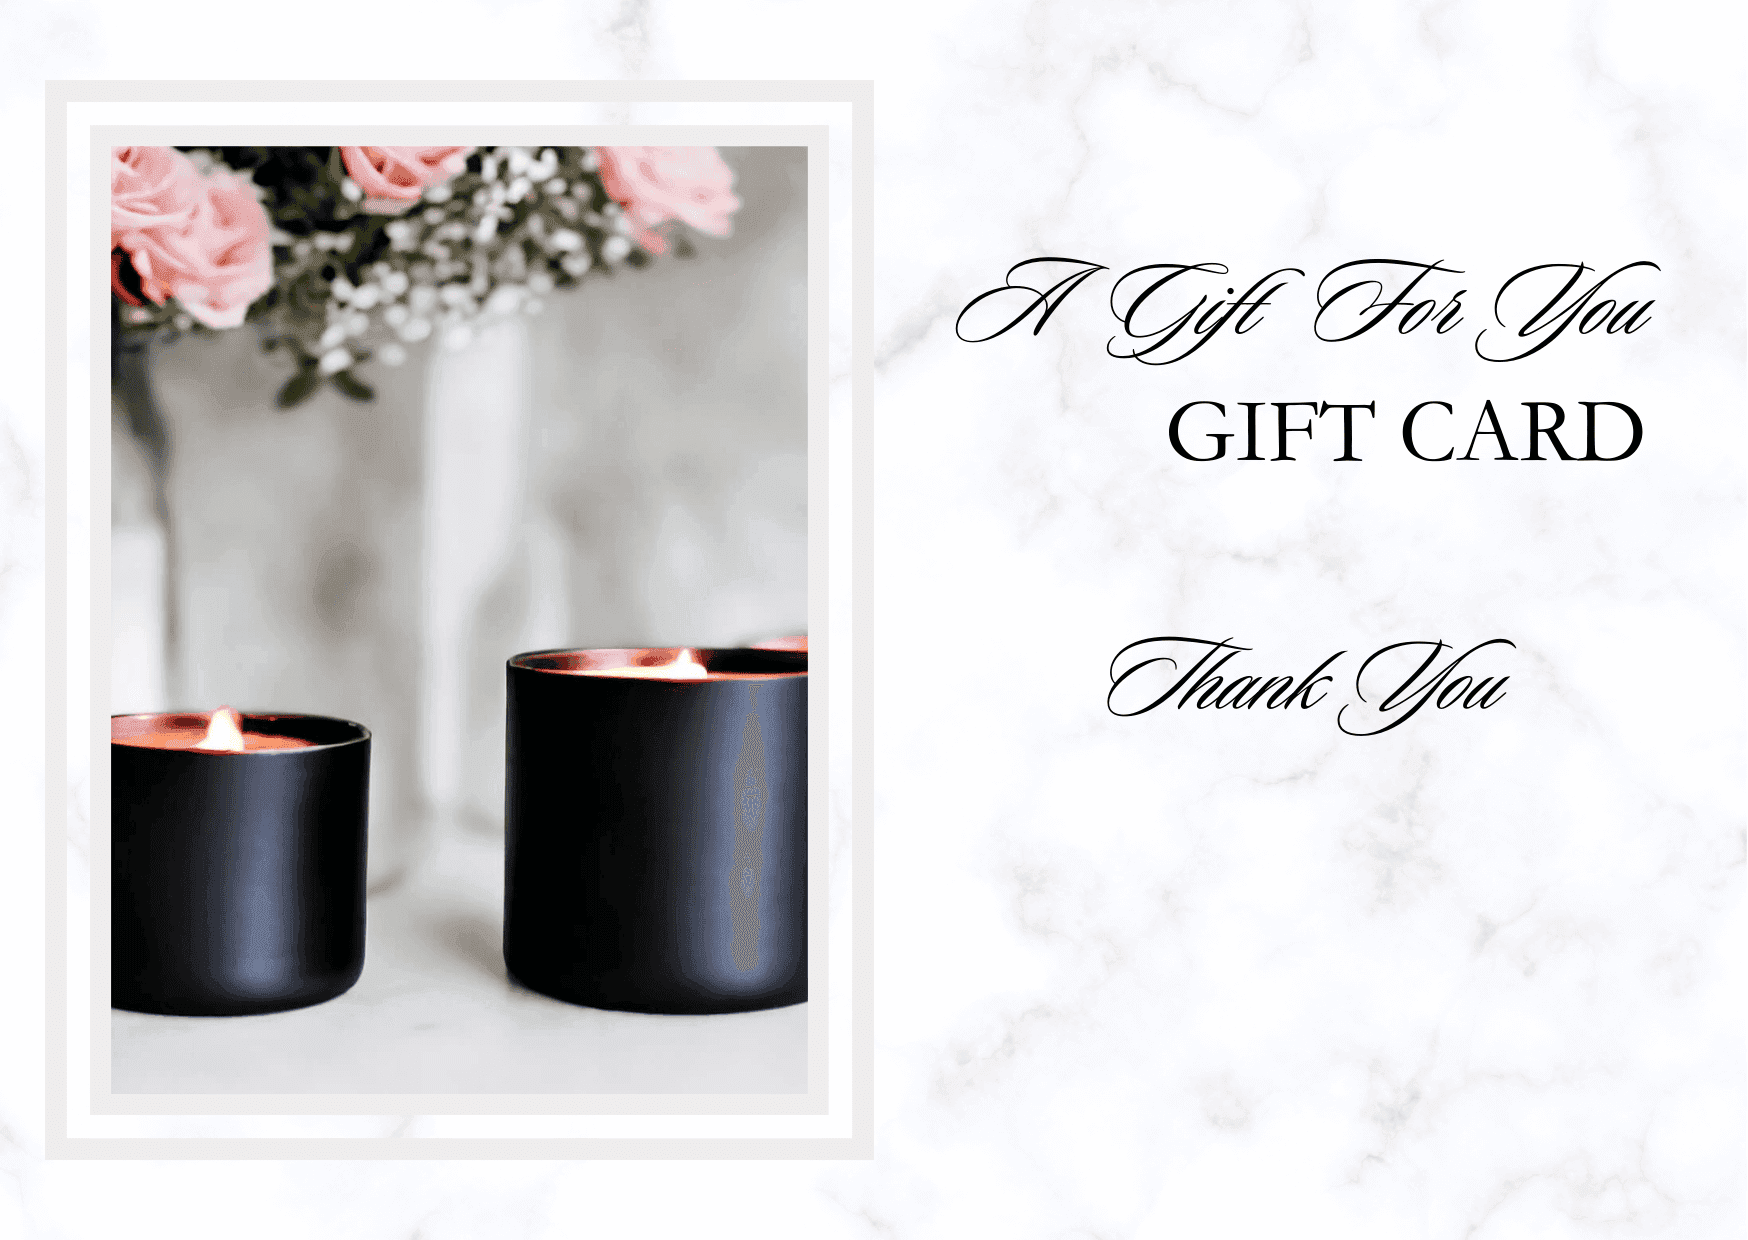 Online gift cards for the wooden wick candles from 10 dollars to 200 dollars